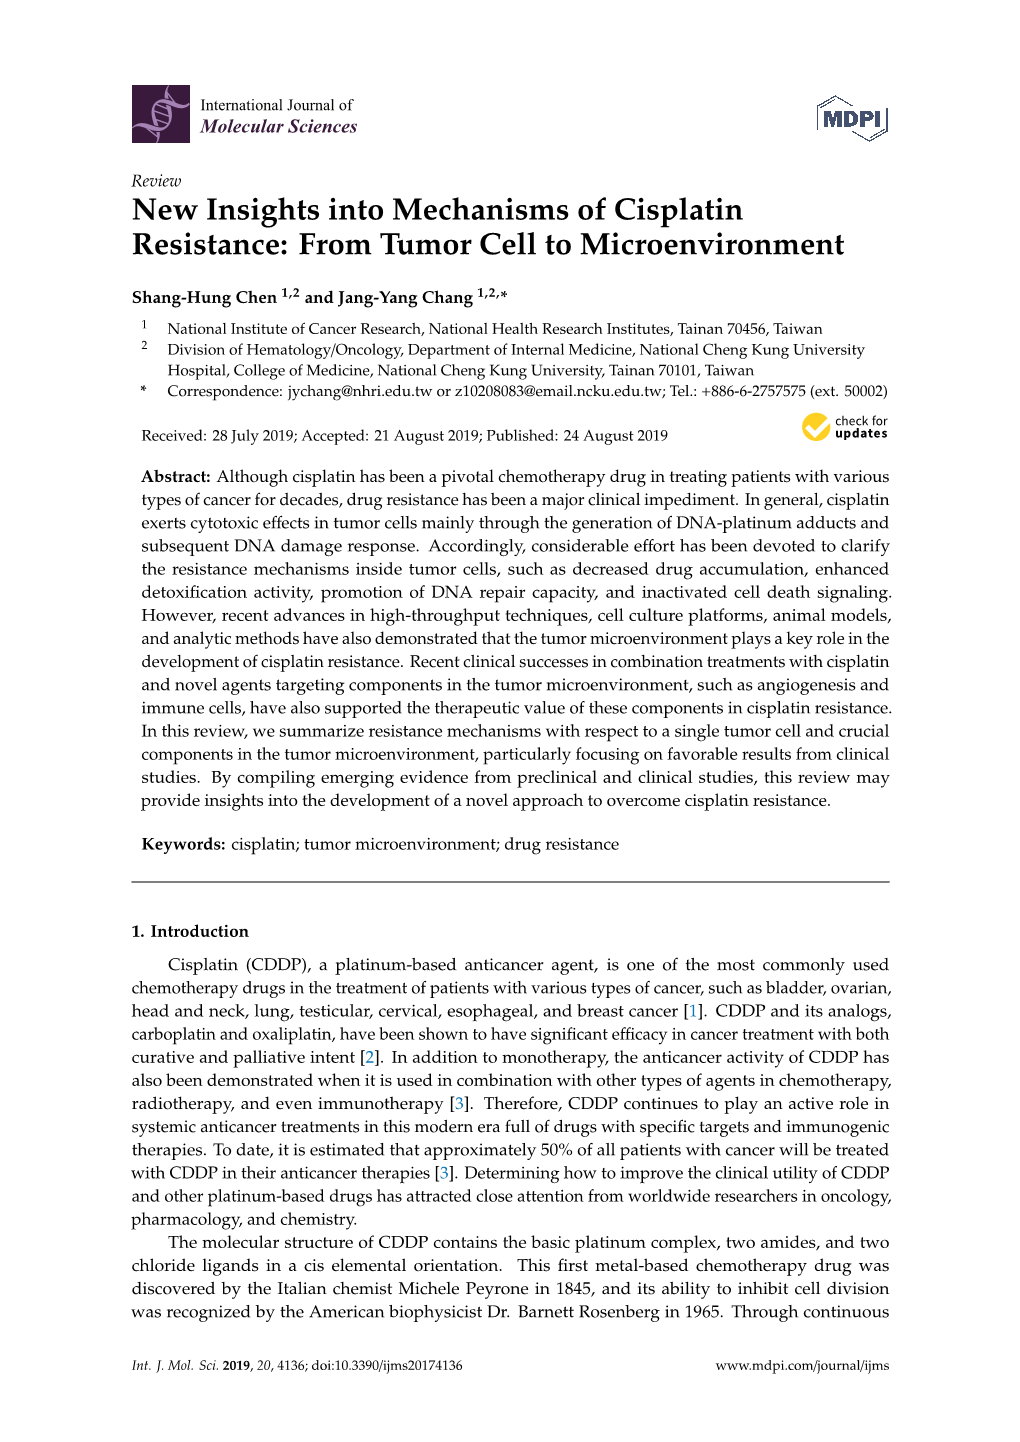 New Insights Into Mechanisms of Cisplatin Resistance: from Tumor Cell to Microenvironment